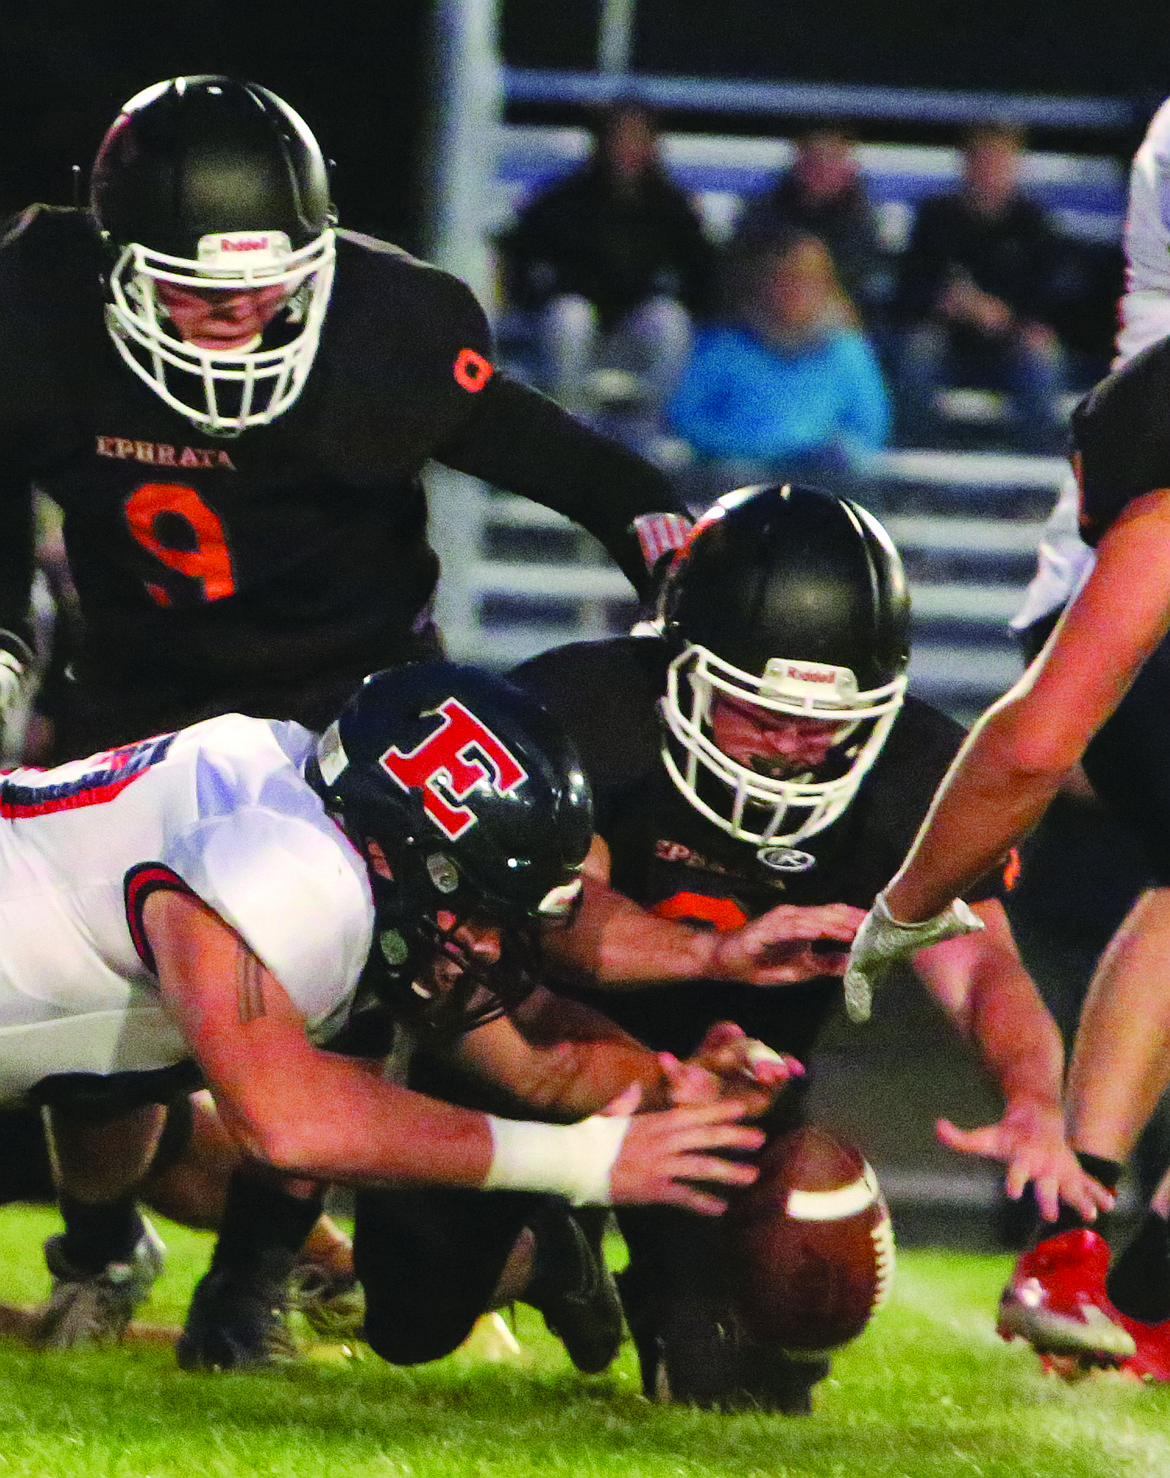 Connor Vanderweyst/Columbia Basin Herald
Ephrata recovers an Ellensburg fumble in the first quarter on Friday.